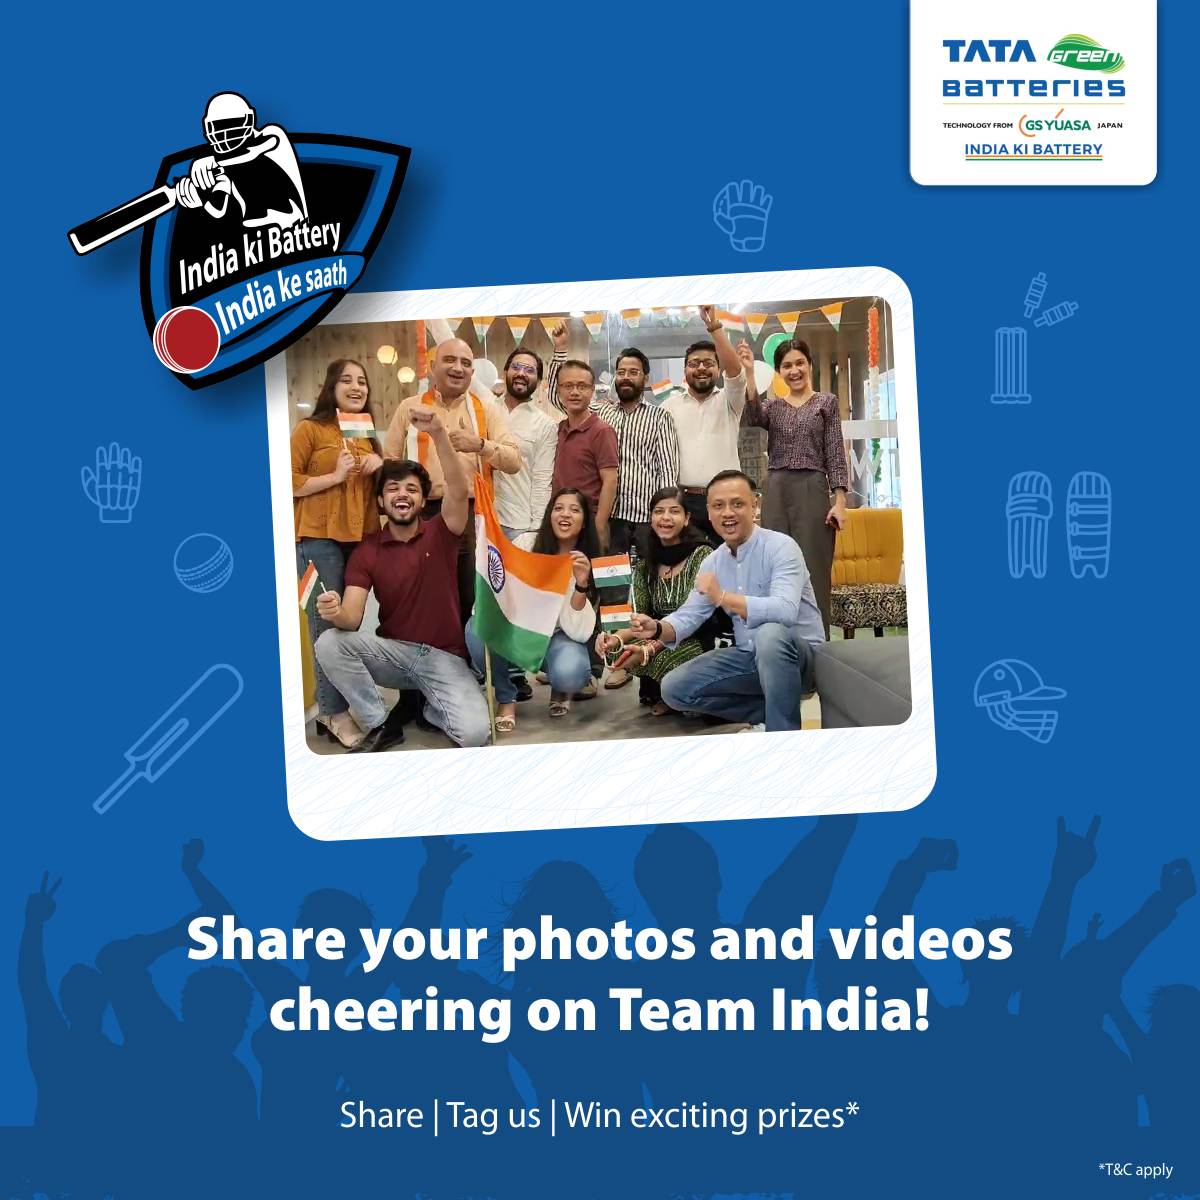 Share your ‘Powerful Fan Moments’ from India Vs Australia with photos and videos.

Whether it's cheering with friends, high-fiving family, or capturing the stadium atmosphere, let's relive the excitement together!

#PowerfulMoments #IndvsAus #CheerForIndia #WorldCup2023